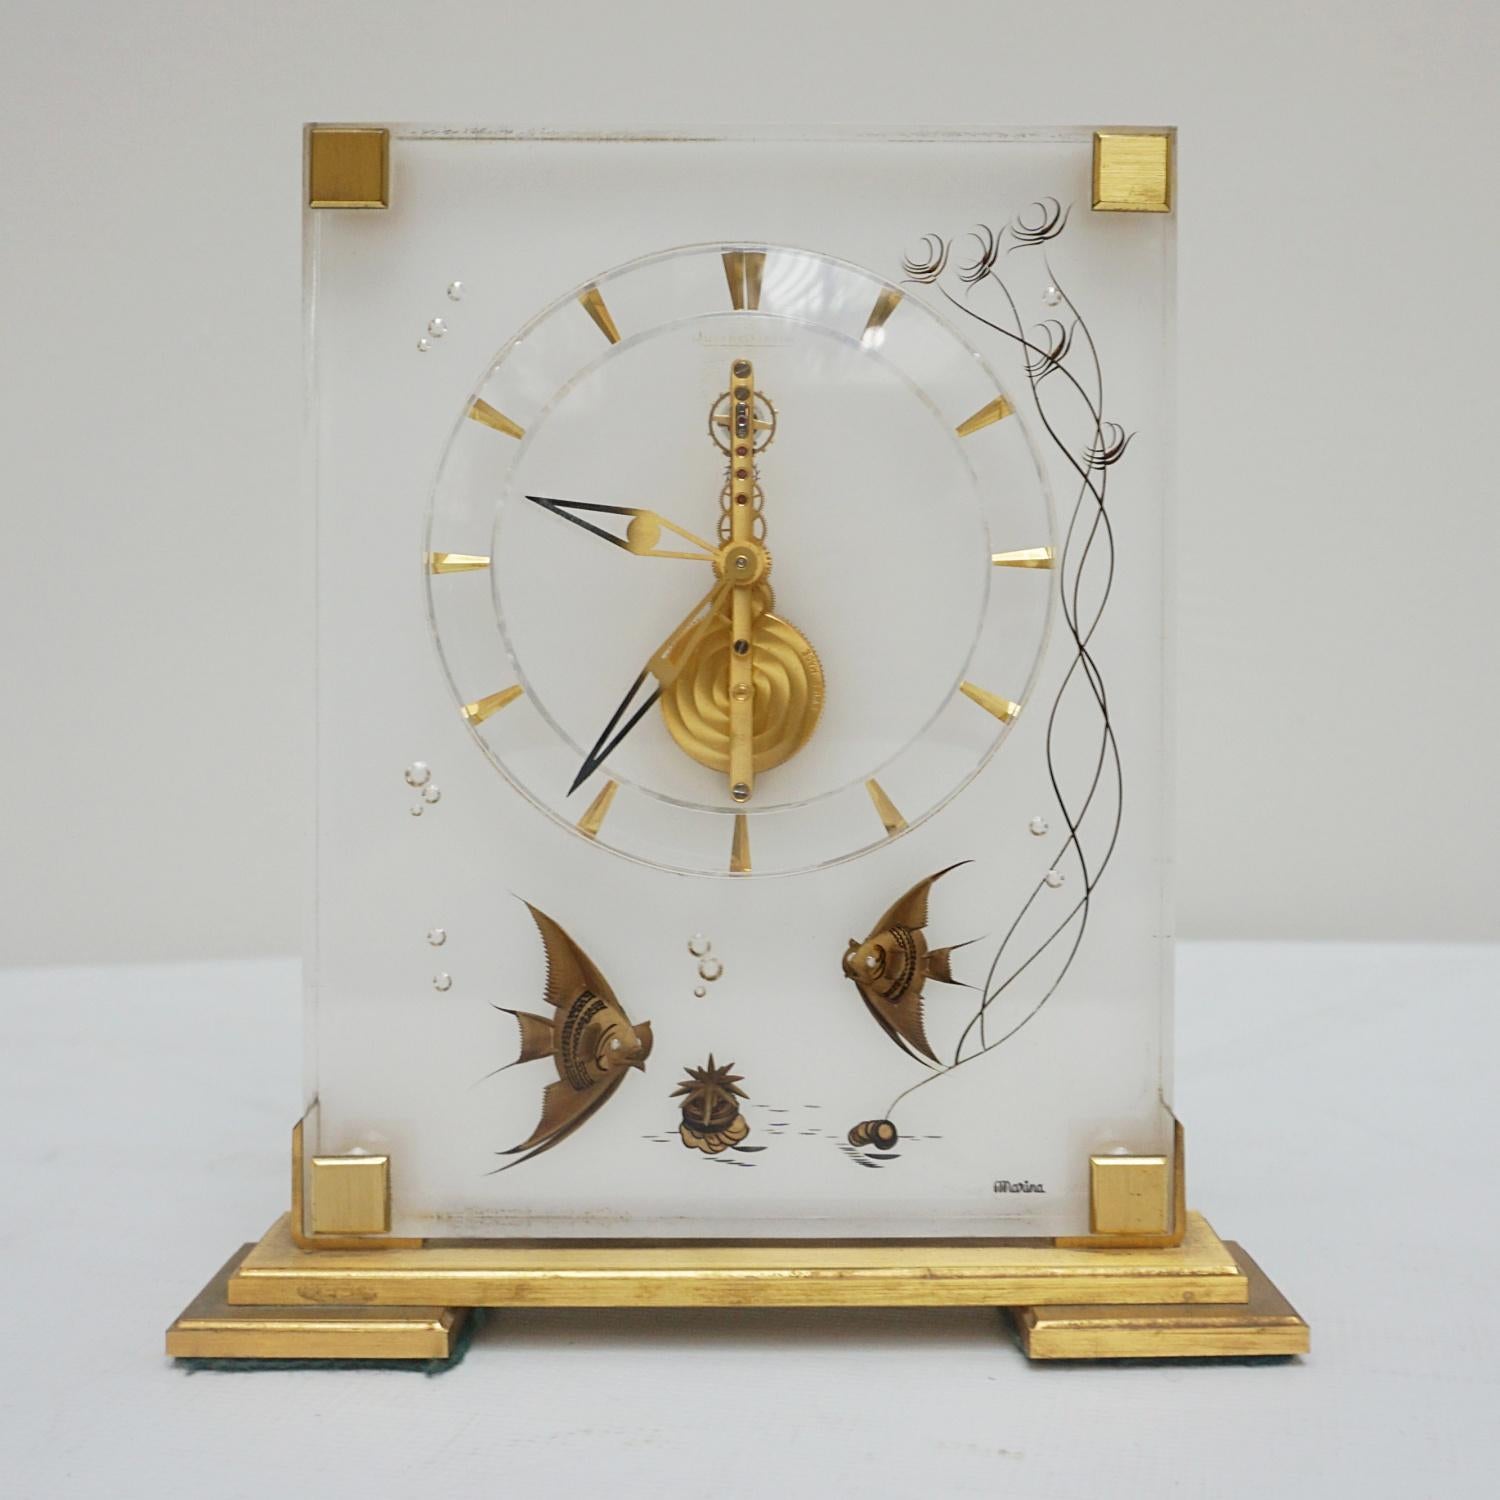 A Mid-Century Jaeger-LeCoultre mantel clock in a Lucite case with inset brass decoration showing fish with reeds and air bubbles rising.. Eight day movement by Jaeger-LeCoultre with baton numerals and original gilded hands. Marina inset to lower